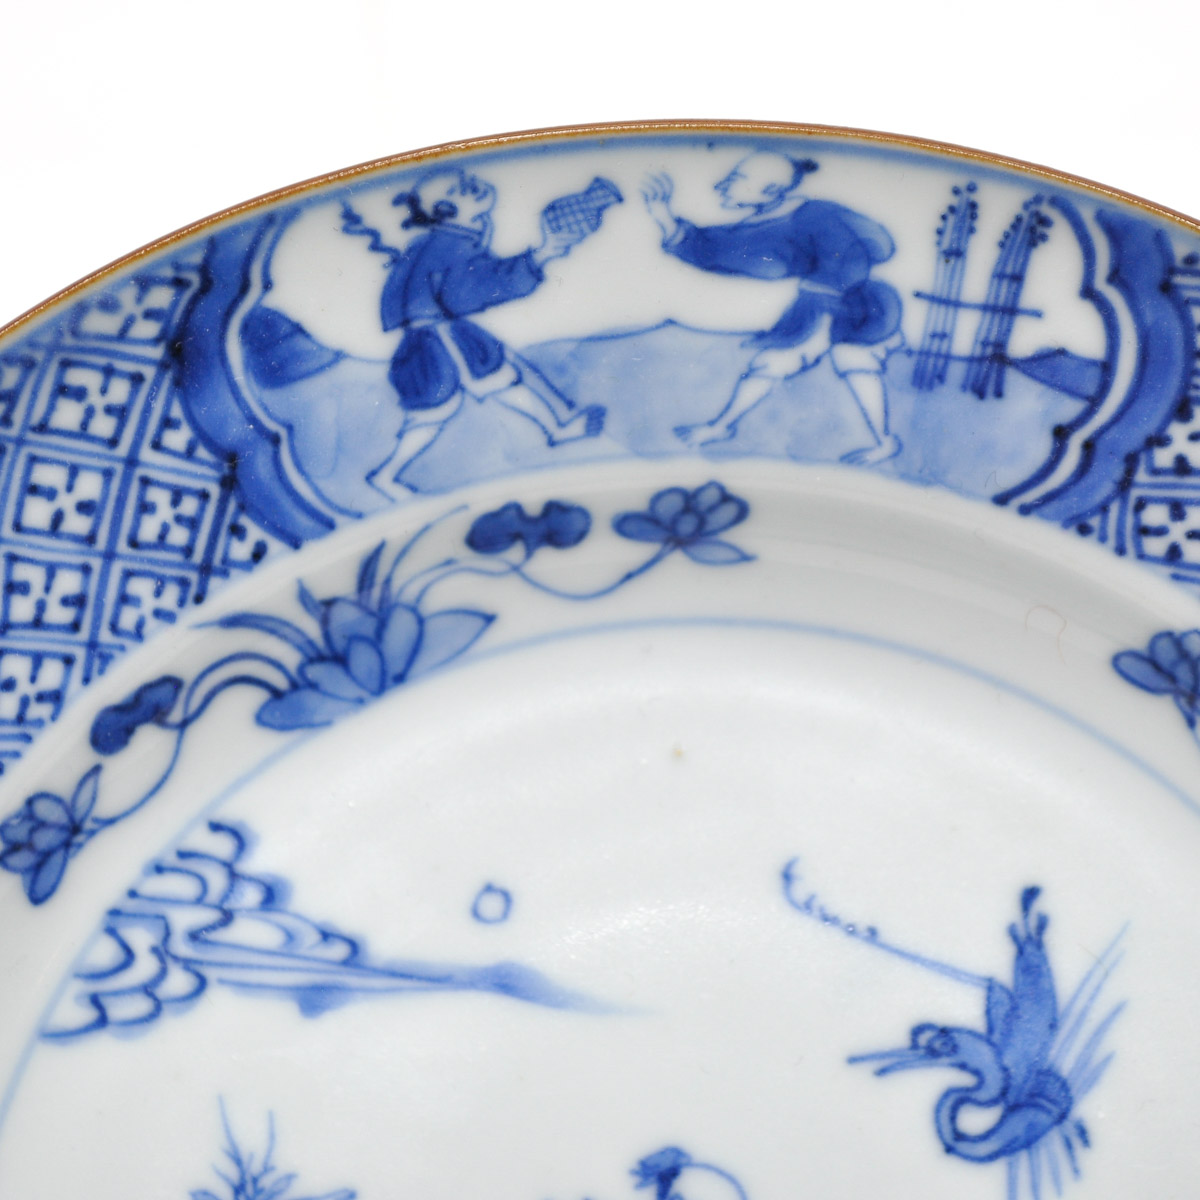 A Blue and White Decor Plate - Image 5 of 5